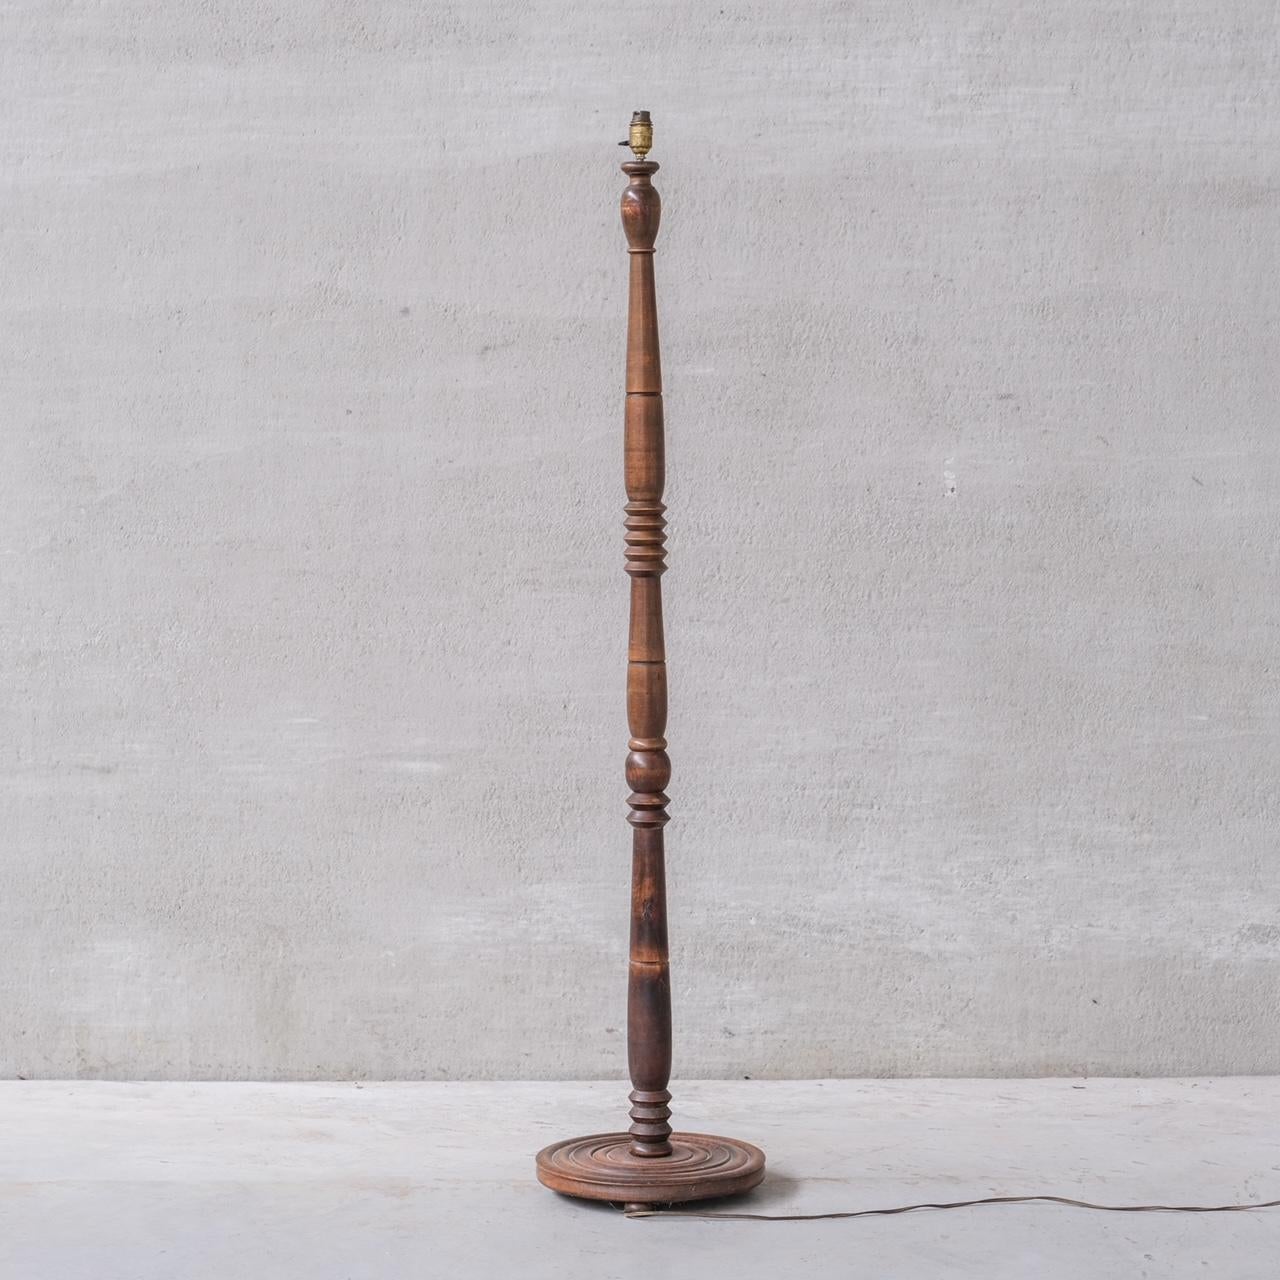 A tall turned wooden floor lamp, likely oak.

France, c1950s.

Since re-wired and PAT tested.

Good vintage condition, some scuffs and wear commensurate with age.

Internal Ref: 12/9/23/009.

Location: Belgium Gallery.

Dimensions: 32 Diameter x 149